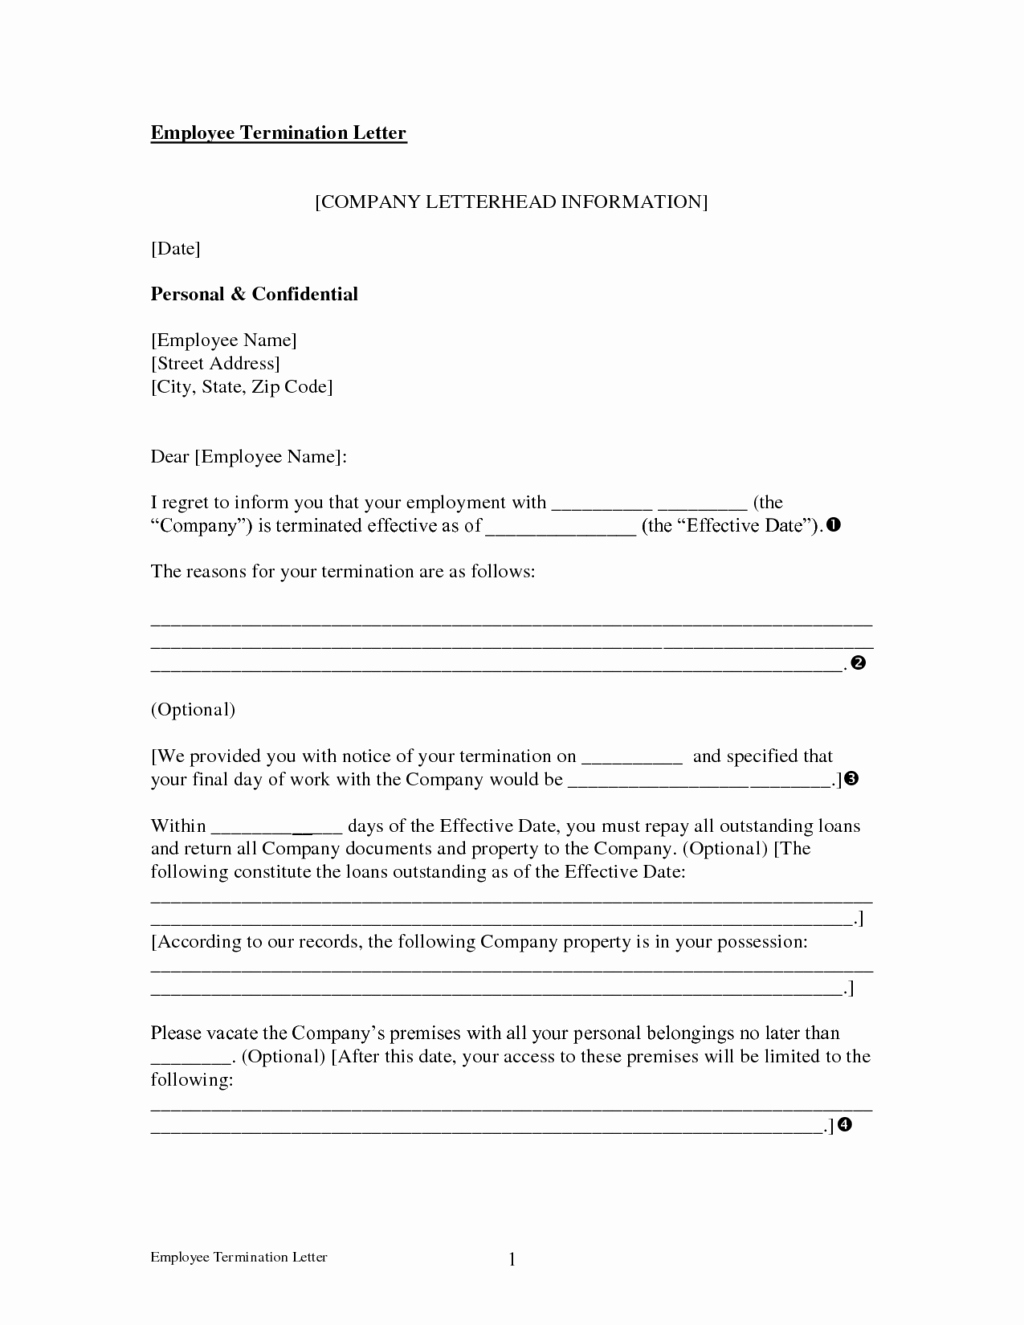 Professional Termination Letter for Employment with Reason